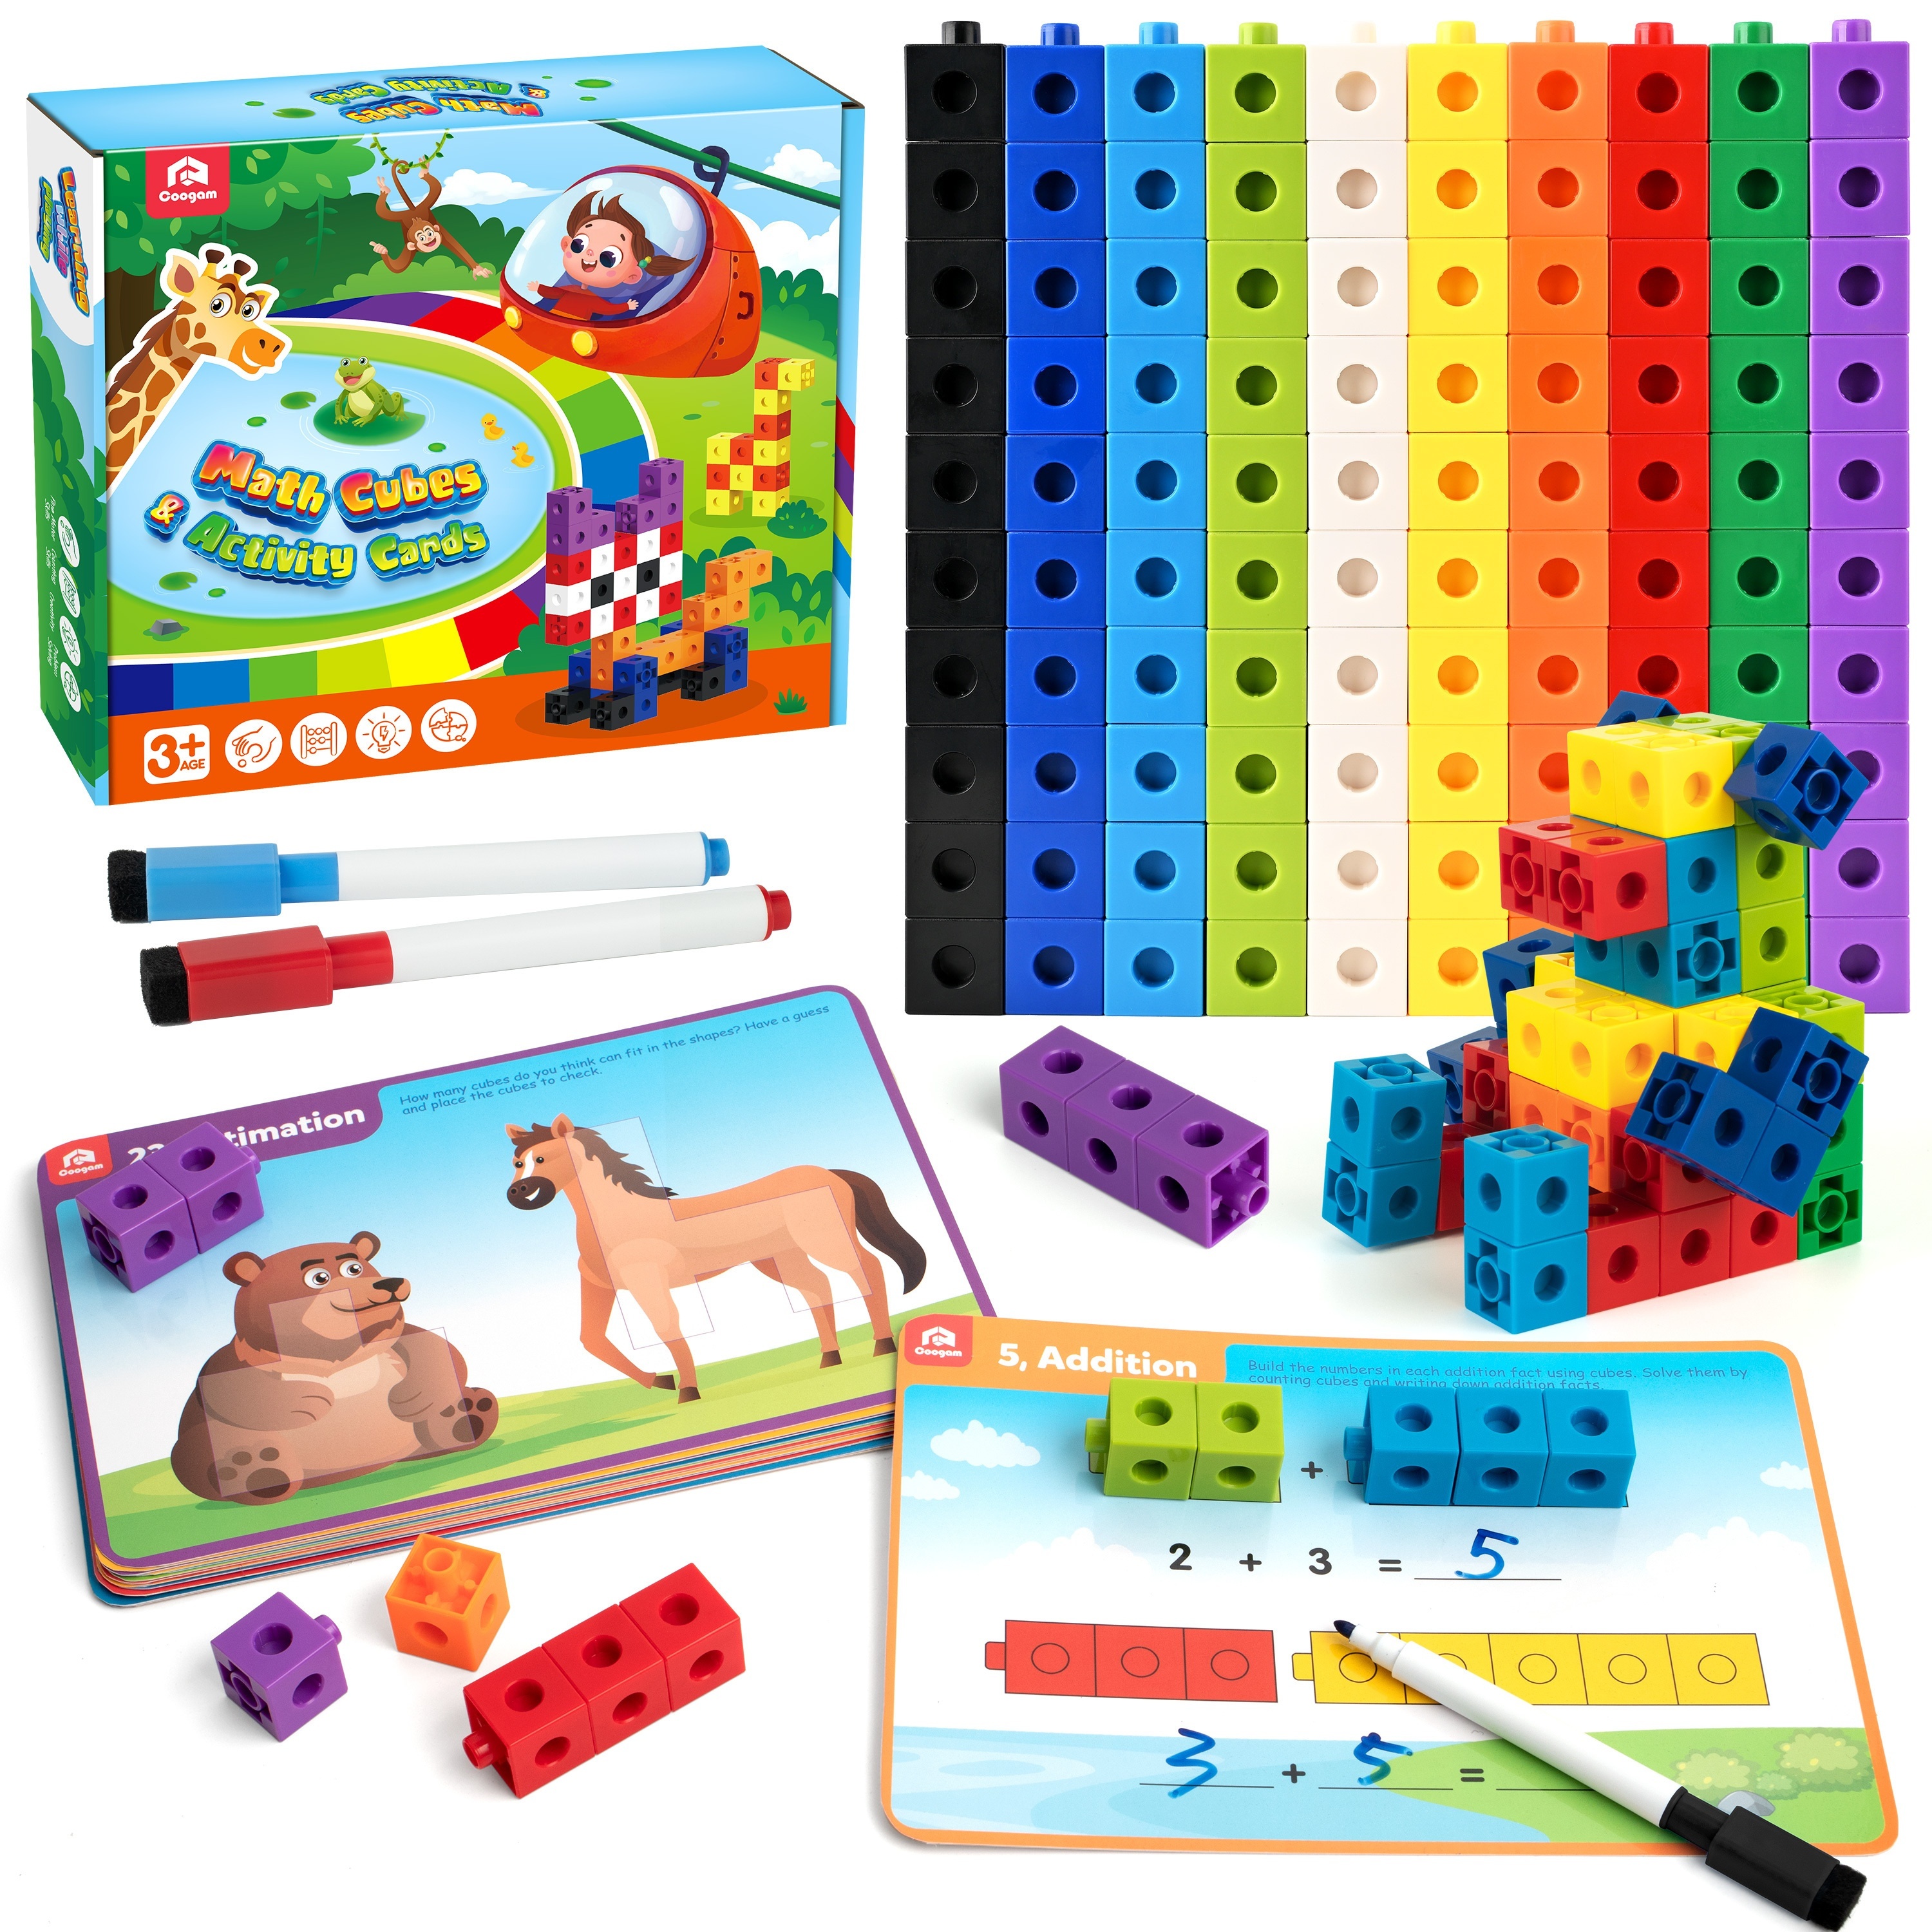 

Coogam Math Cubes Set, Number Counting Blocks With Activity Snap Linking Cubes, Math Construction Toy Gift For Preschool Learning 3-5 Year Old Kids, Back-to-school Season Gift